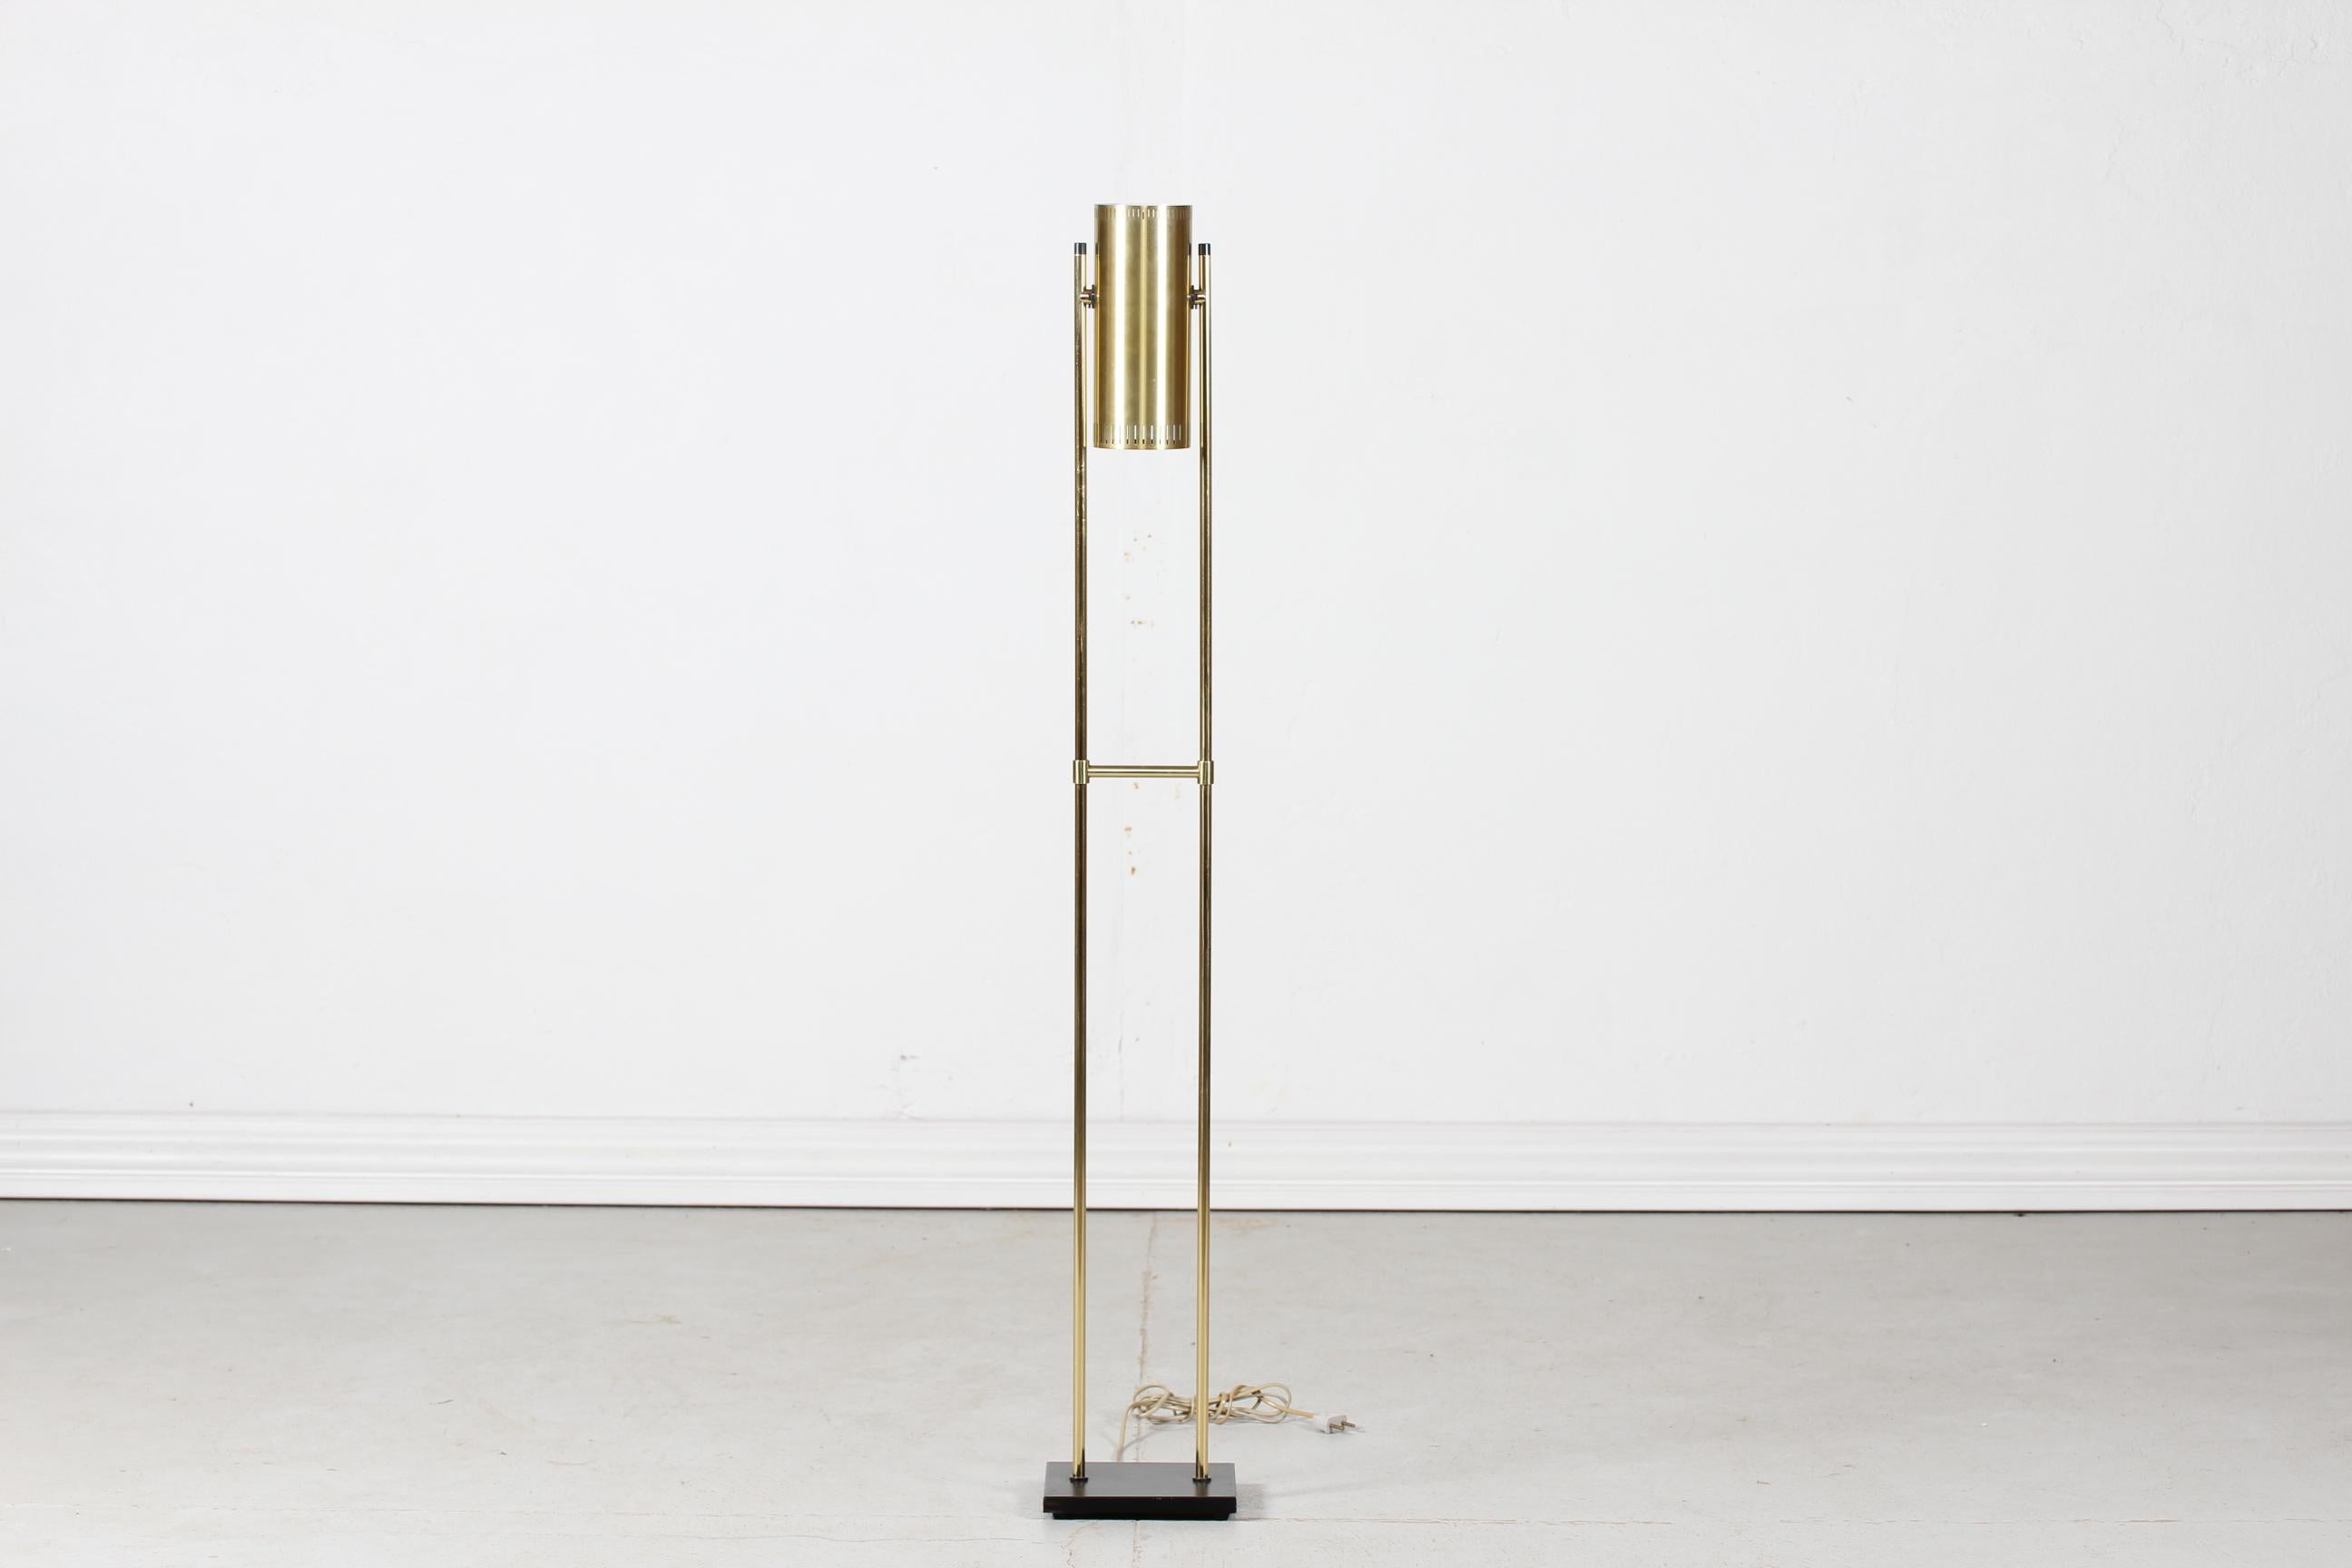 Original vintage Trombone floor lamp designed by Danish designer Jo Hammerborg.
The cylindrical shade and stem is made of brass, the lamp base is of metal with lacquer. The adjustable shade is perforated at the rim.
The lamp is made by the Danish